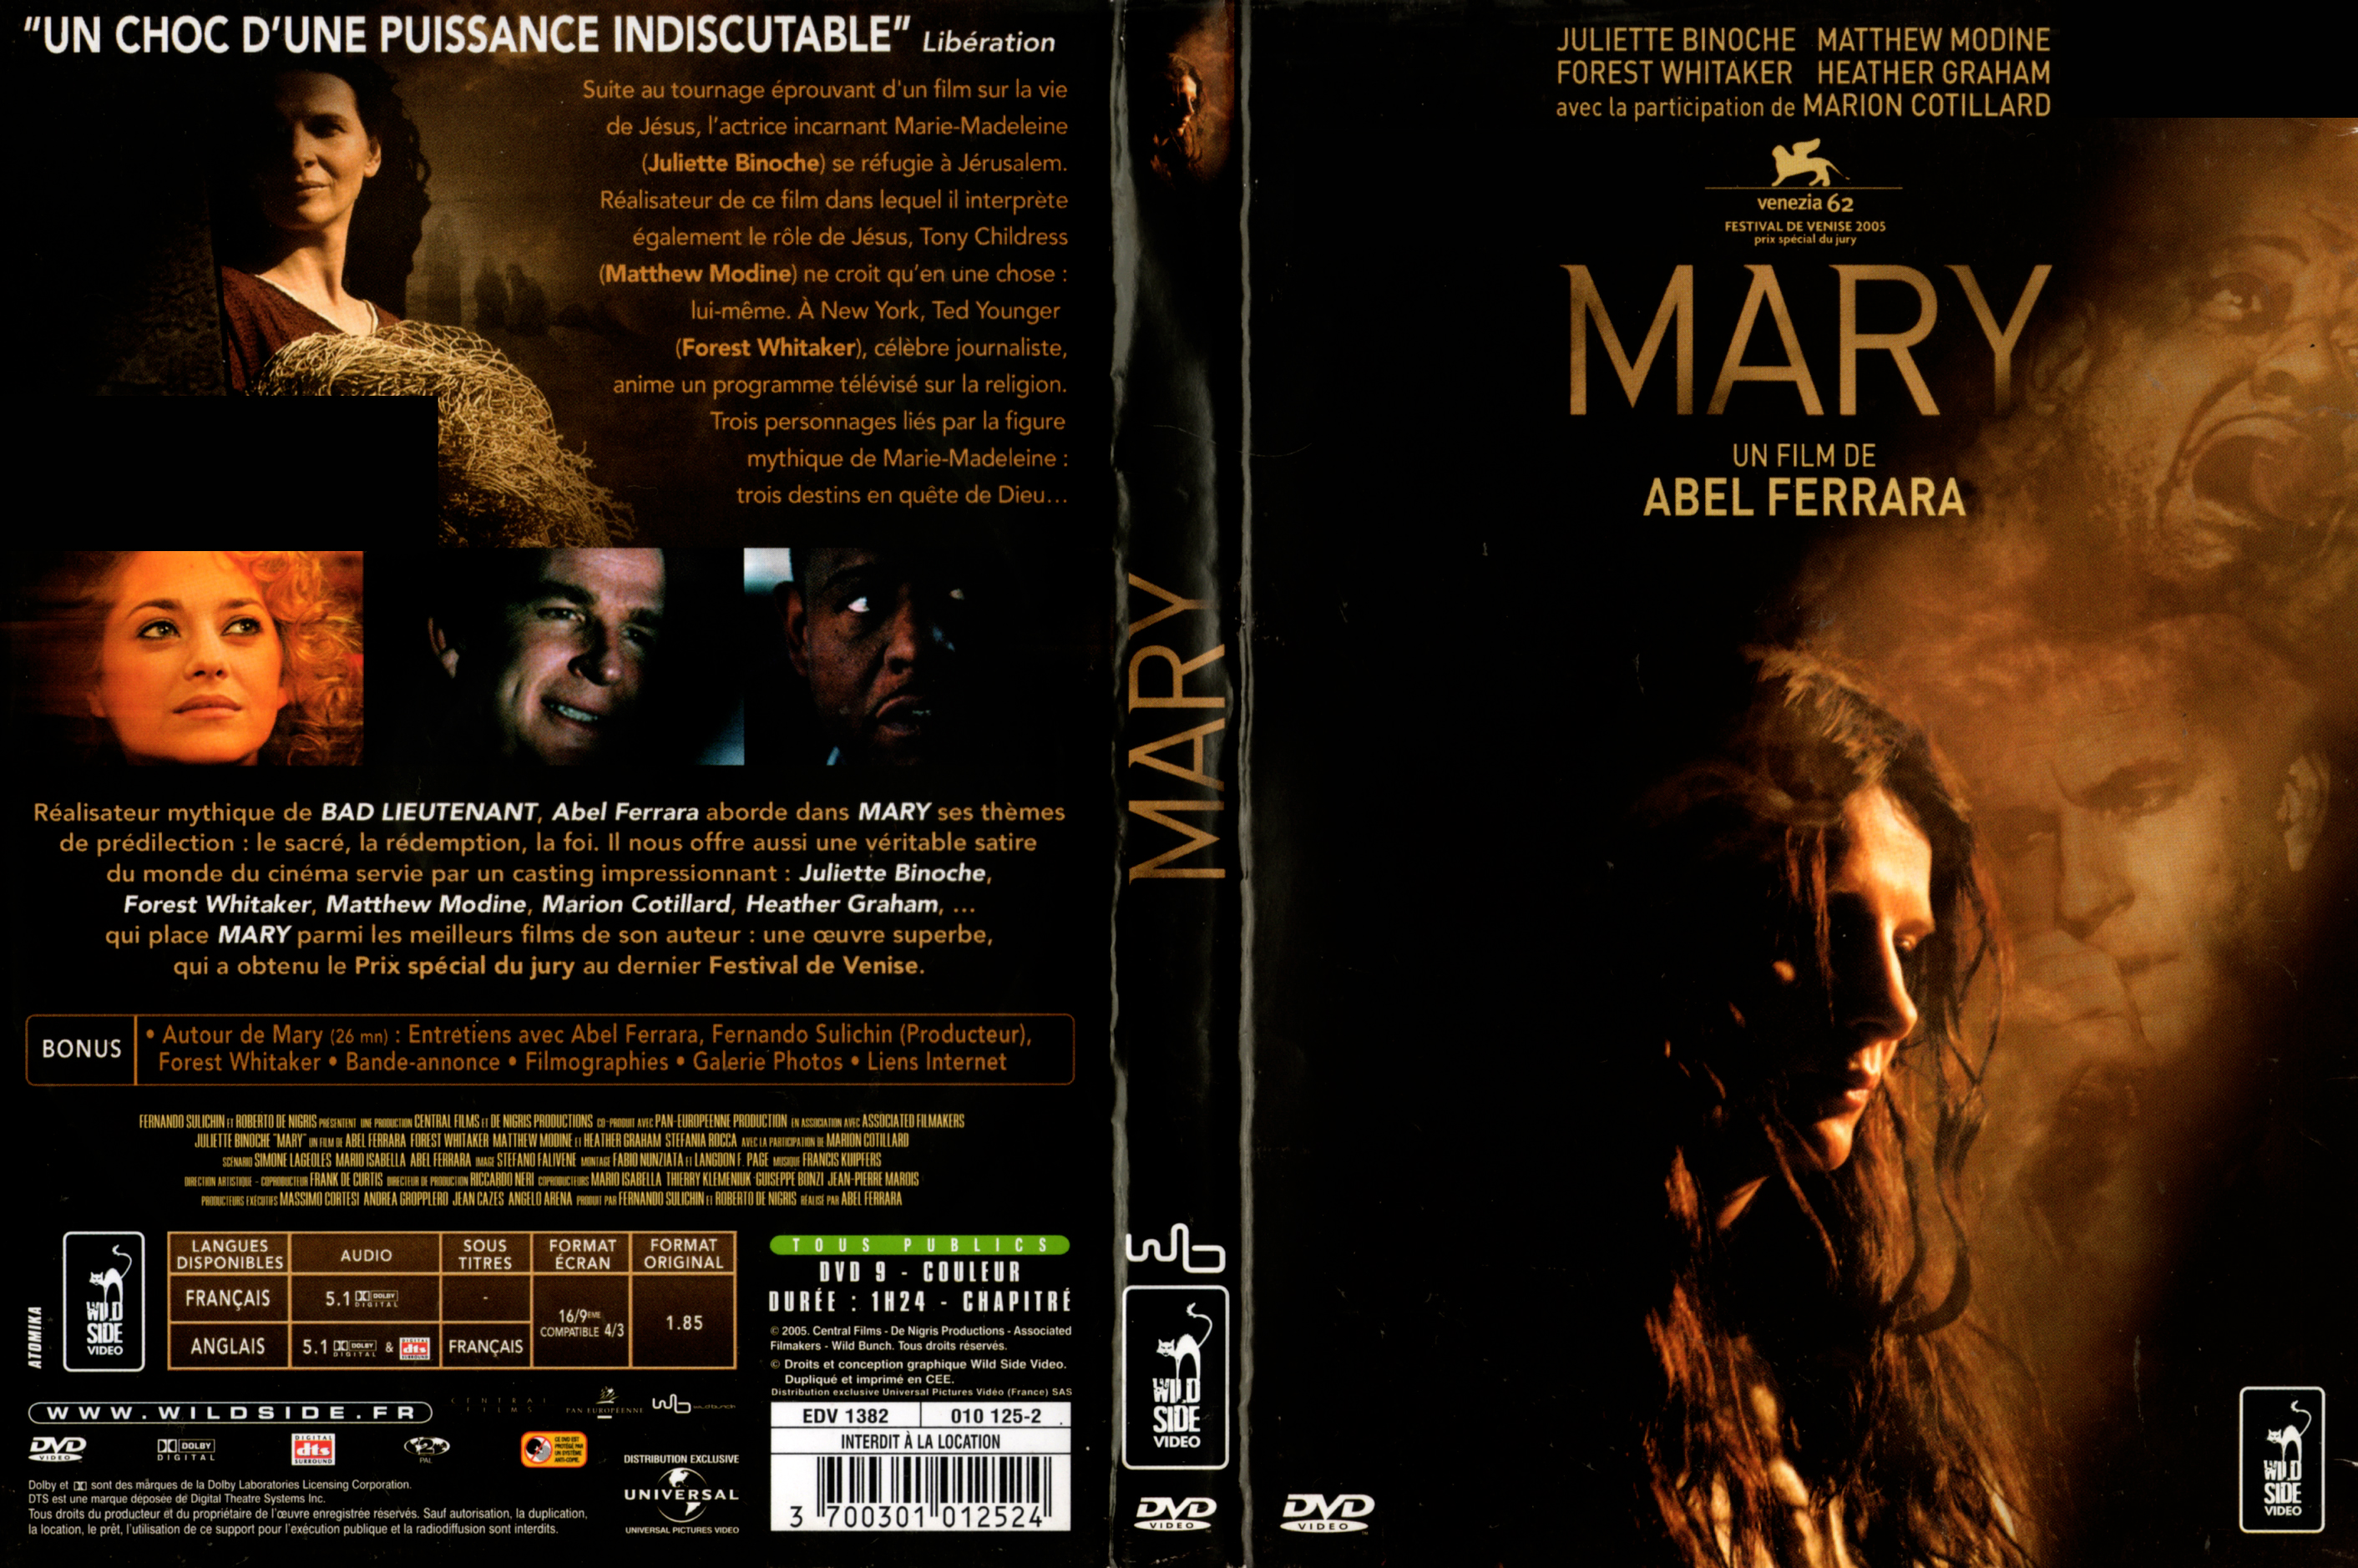 Jaquette DVD Mary v2